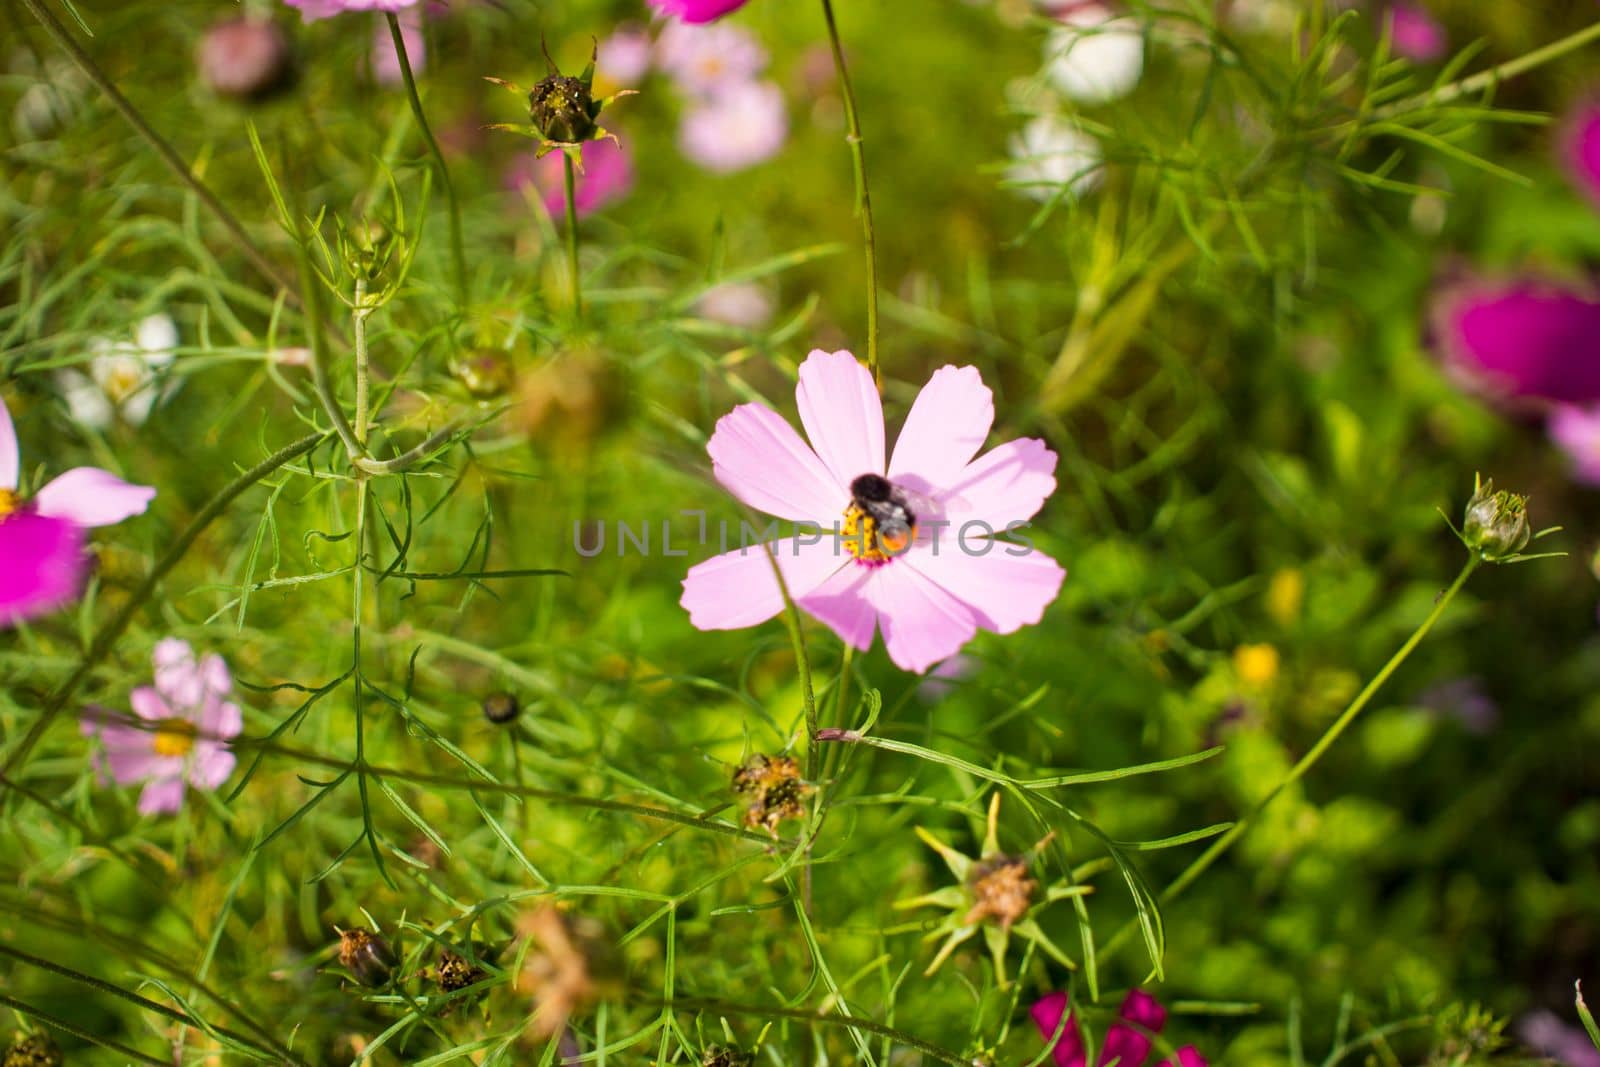 young bumblebee bathing in the pollen of a pink daisies flower on a flowerbed against a background of green leaves